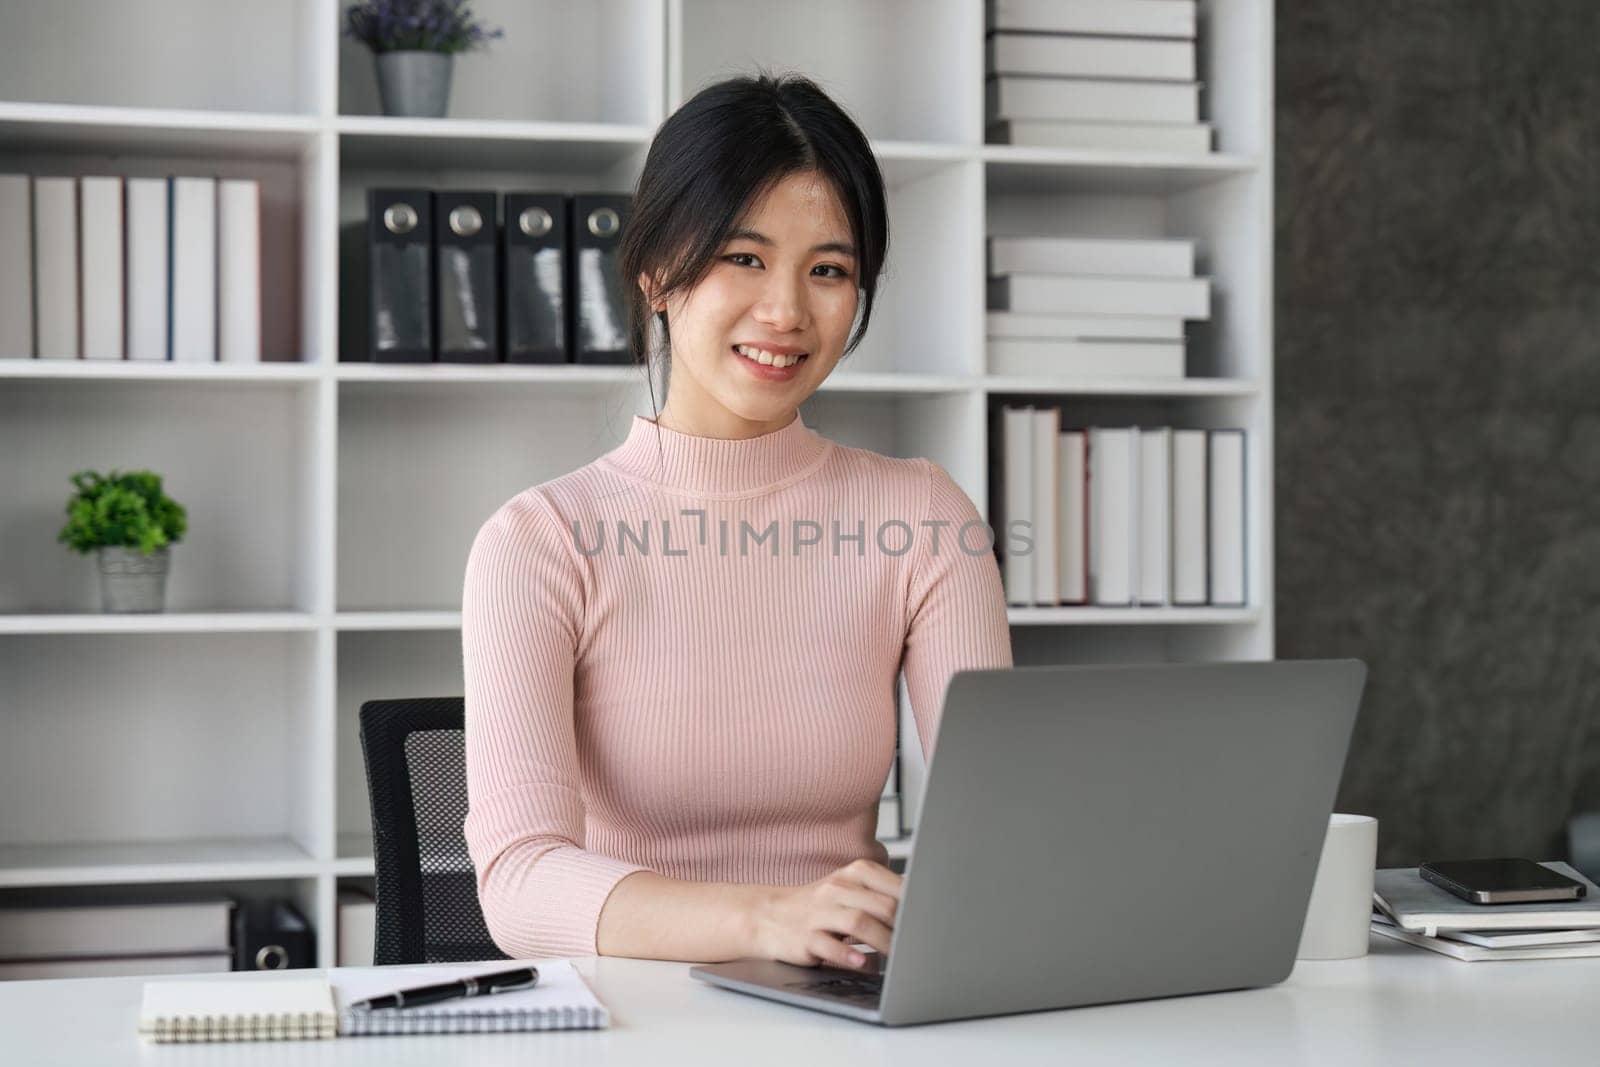 Beauitul young woman working using computer laptop smile looking at camera.